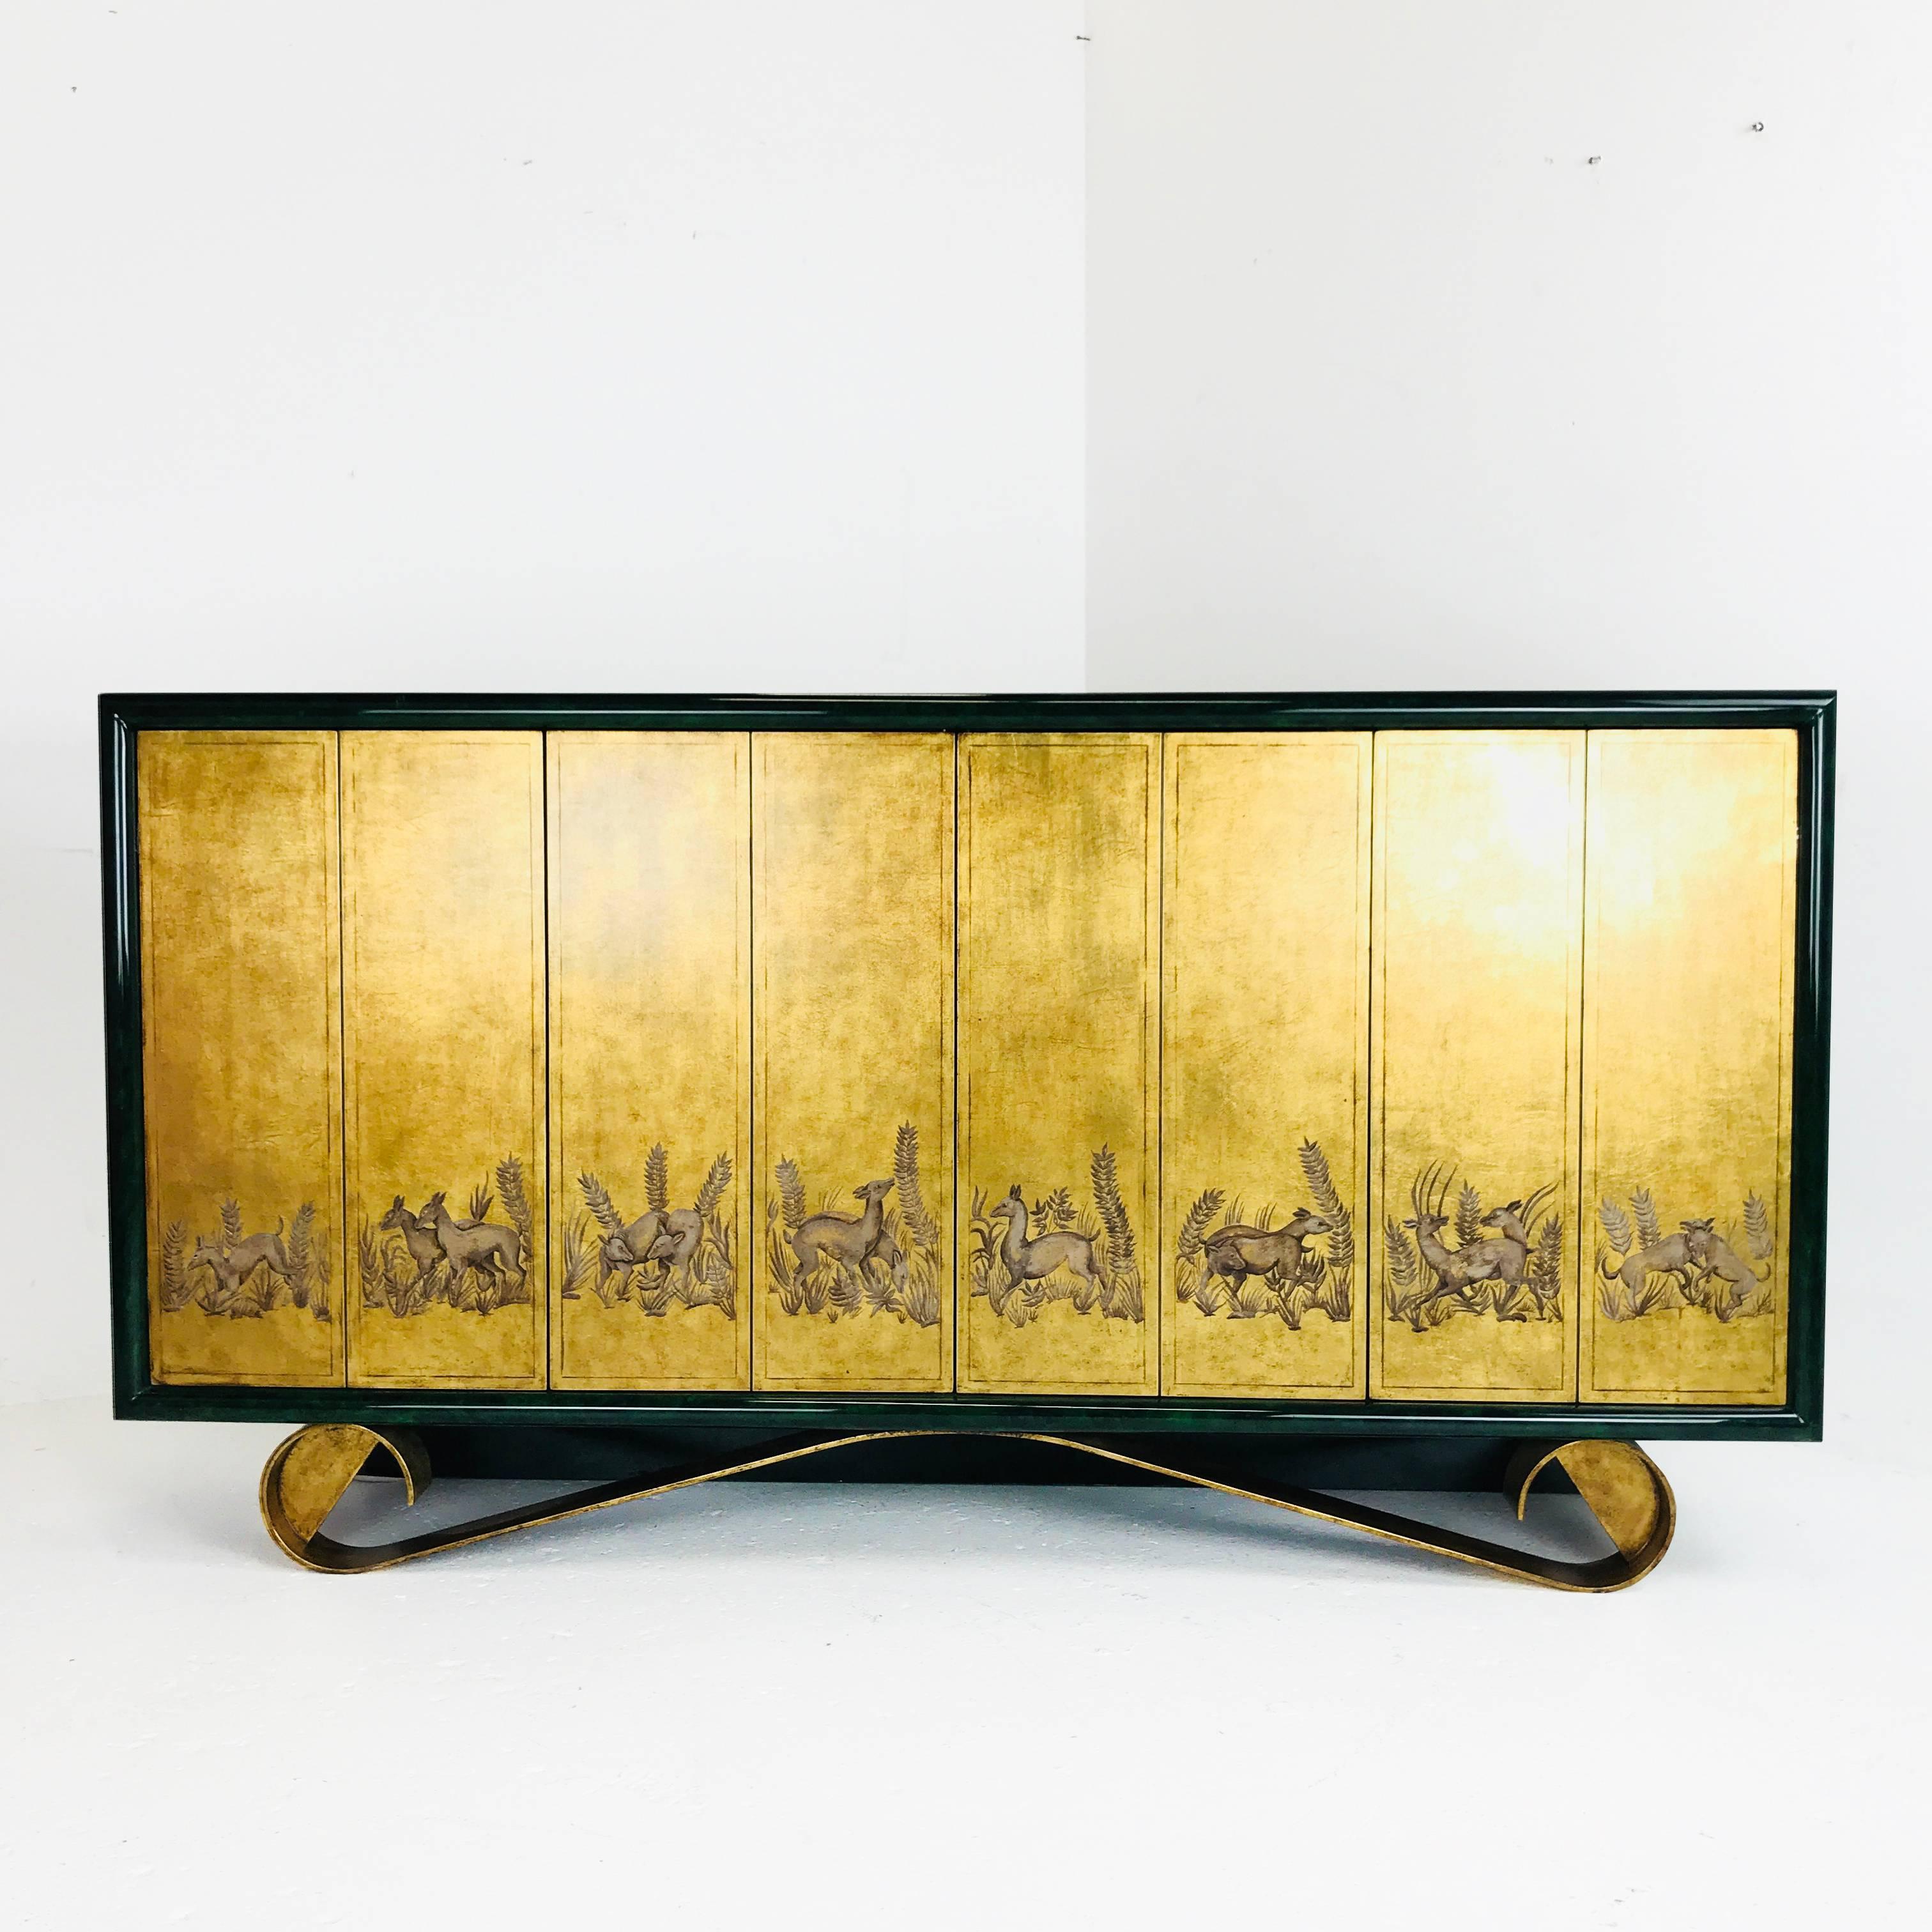 A true work of art, this Cassetto sideboard by Jean de Merry features four touch latch doors with animal motifs on a gold leaf background, gilded scroll metal base and a midnight green gloss lacquer finish.

Dimensions: 72